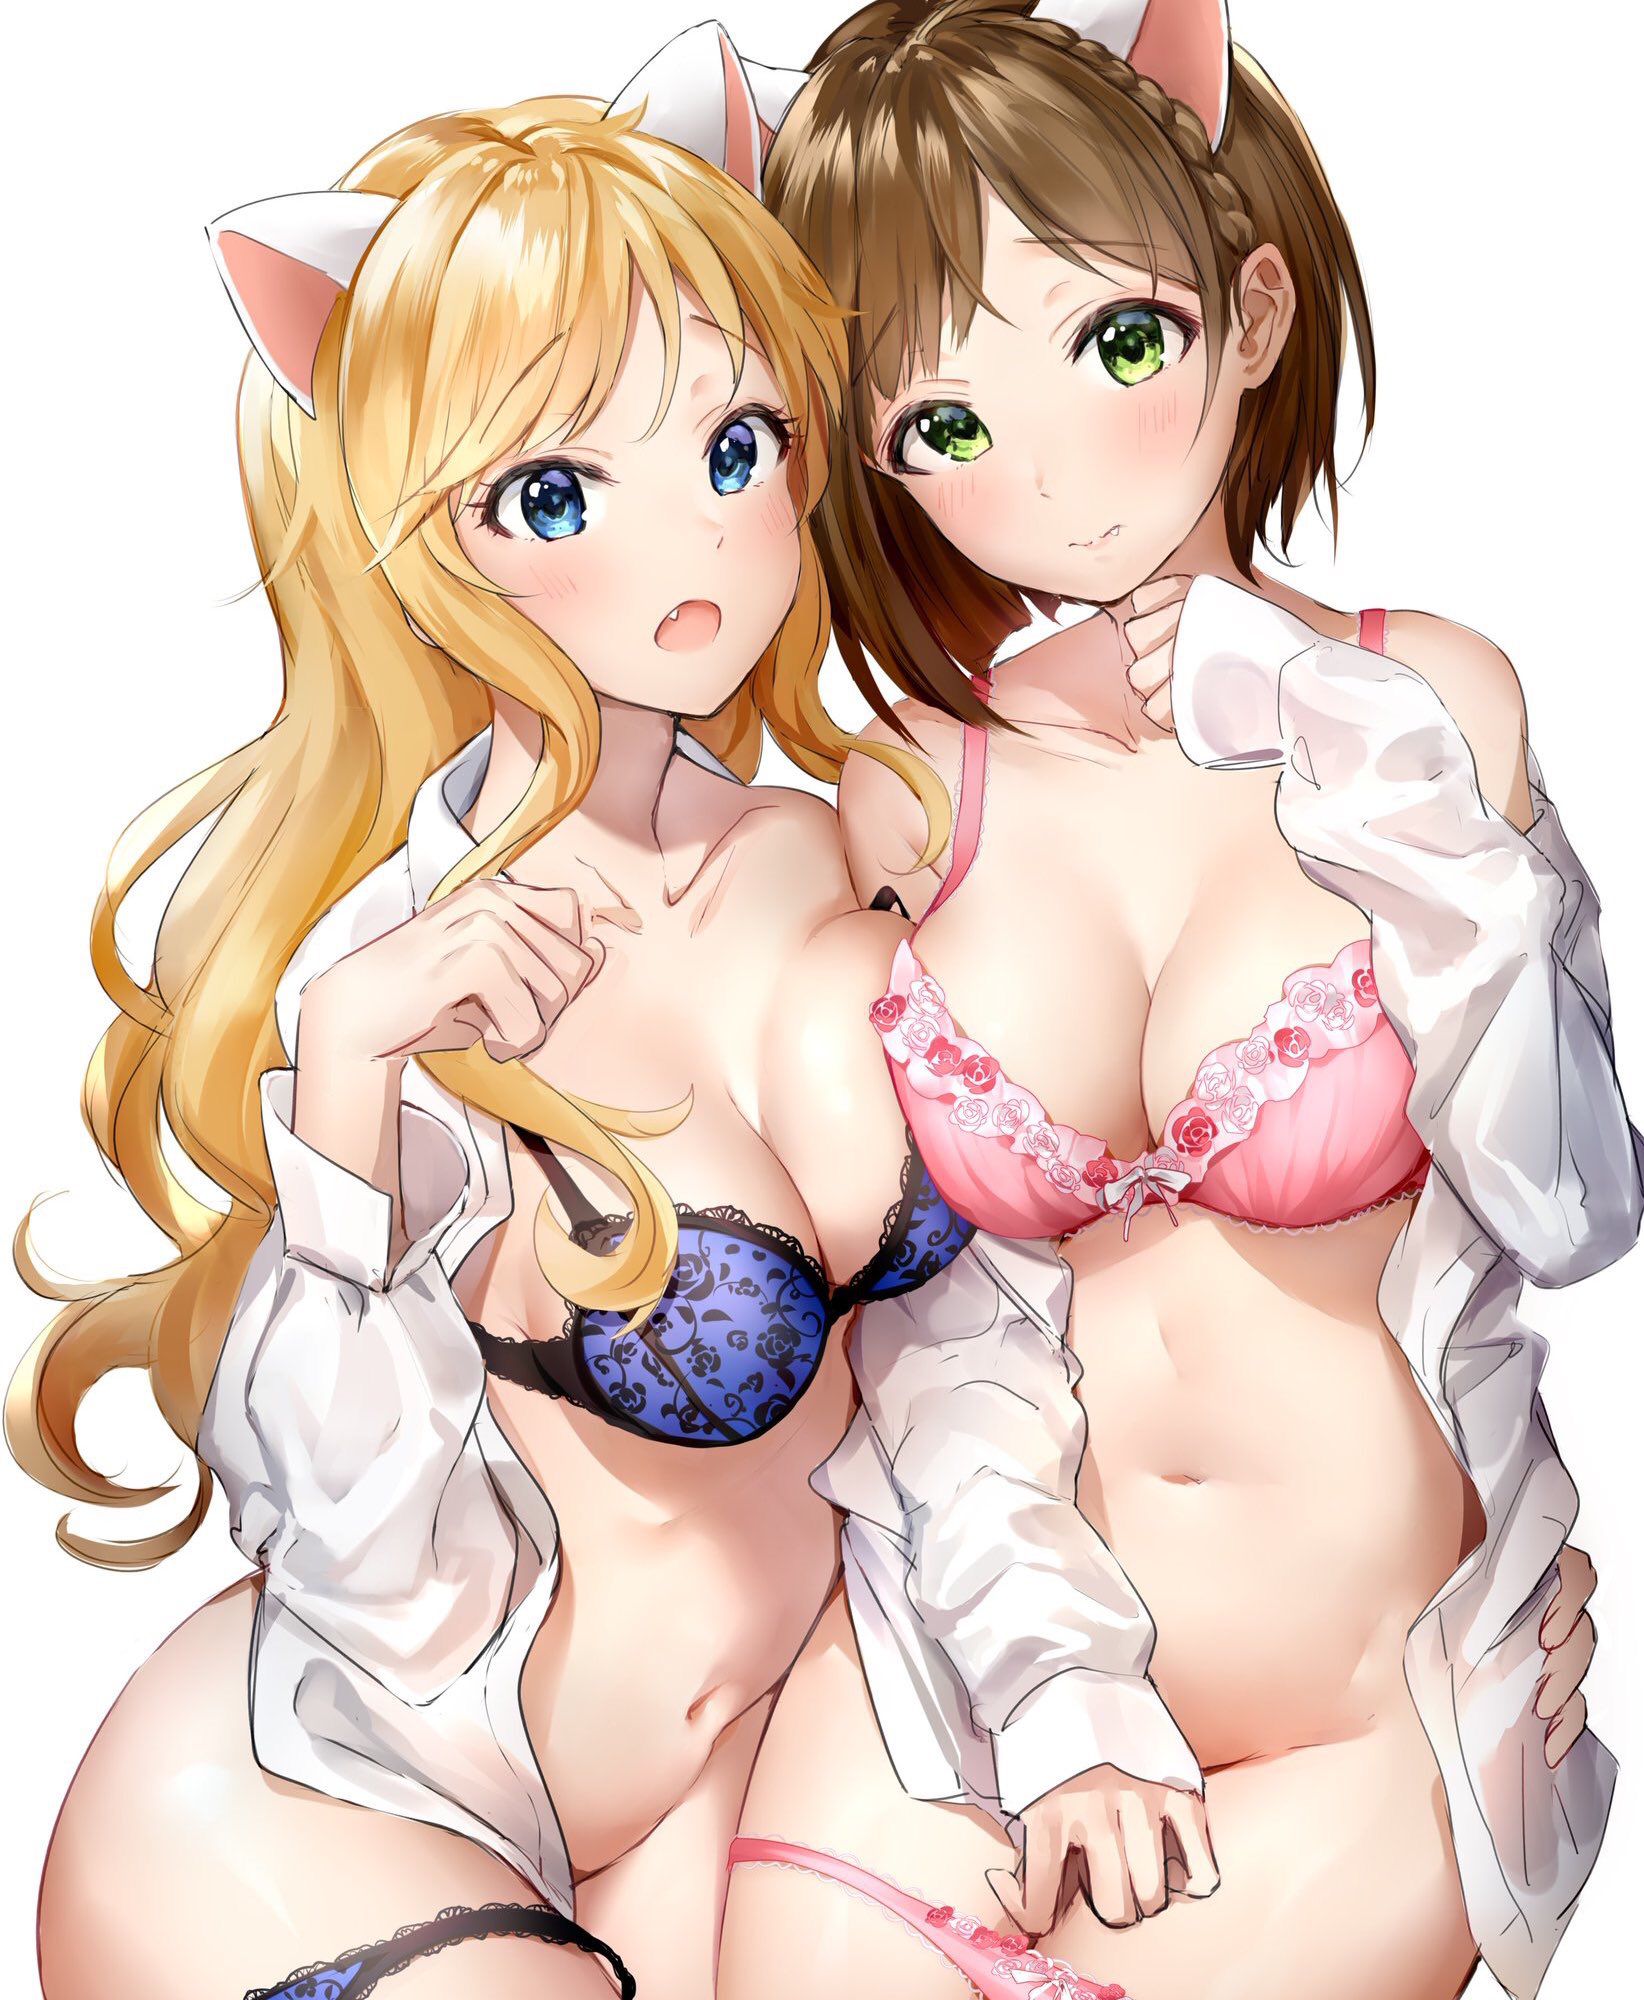 【Erotic Anime Summary】 Valley erotic images of busty beauties 【50 photos】 45